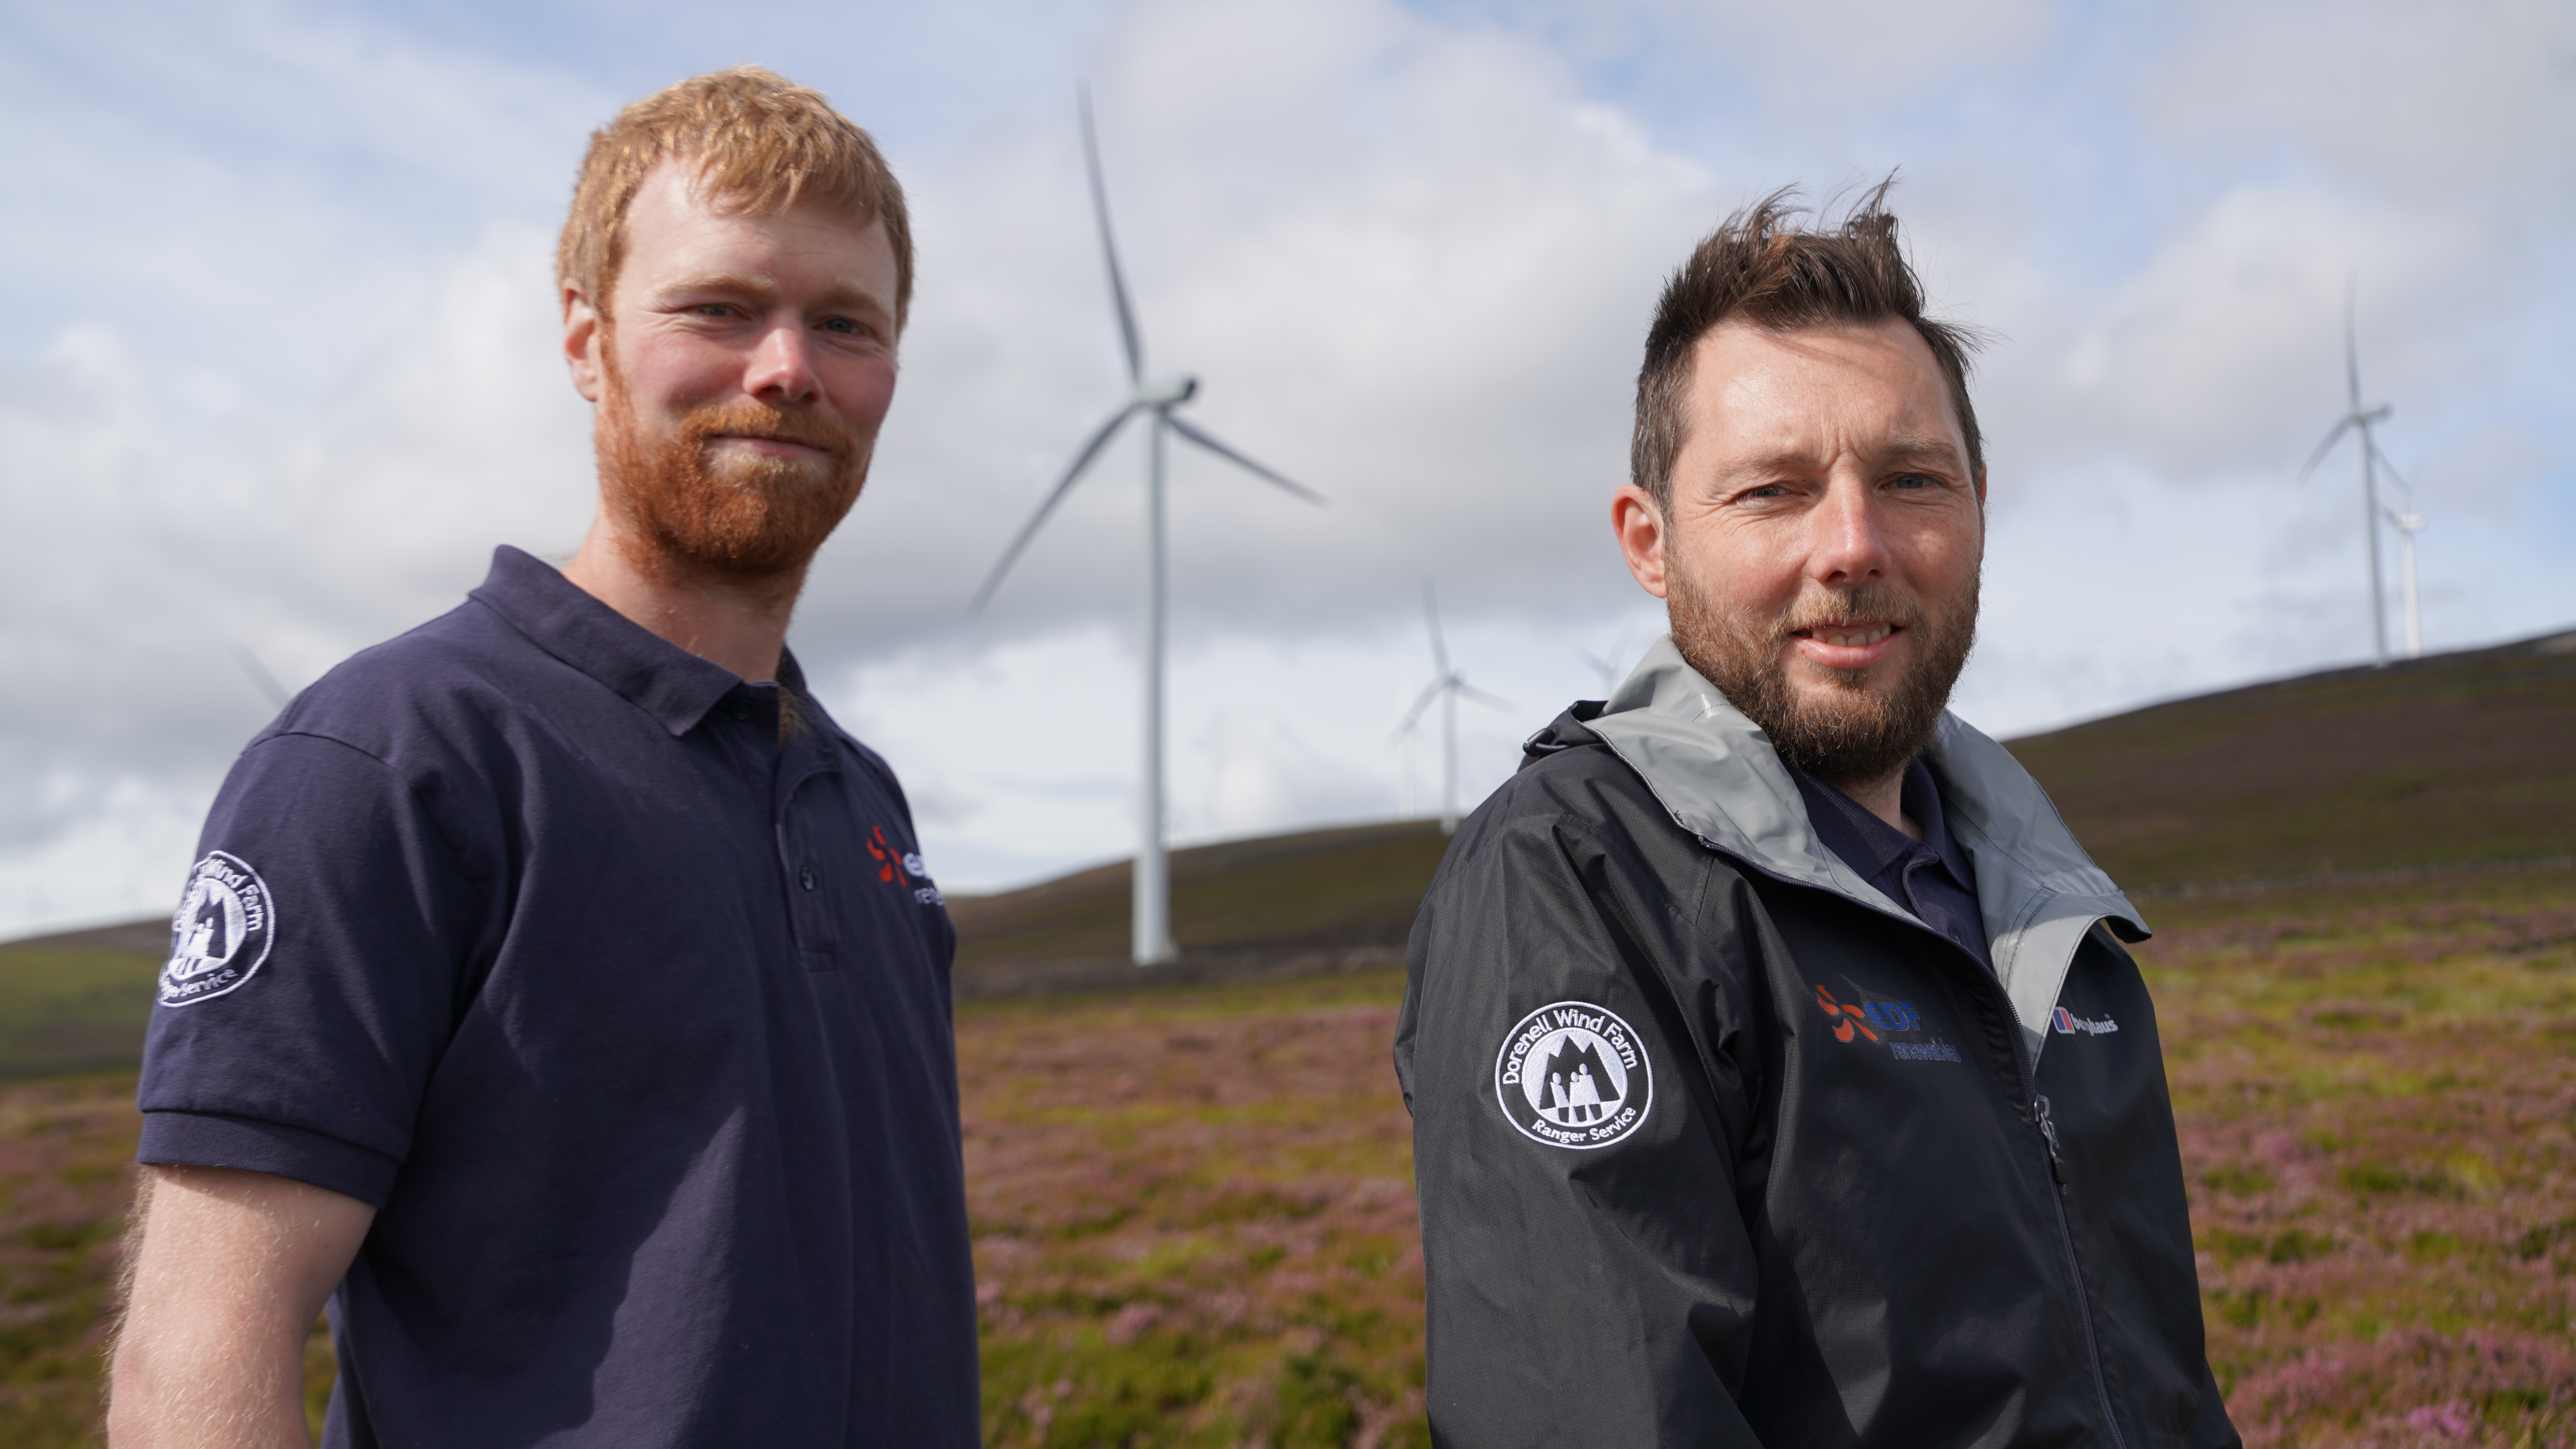 Stephen Reeves and Mark Johnstone have been appointed countryside rangers at the Dorenell wind farm on the Glenfiddich Estate.